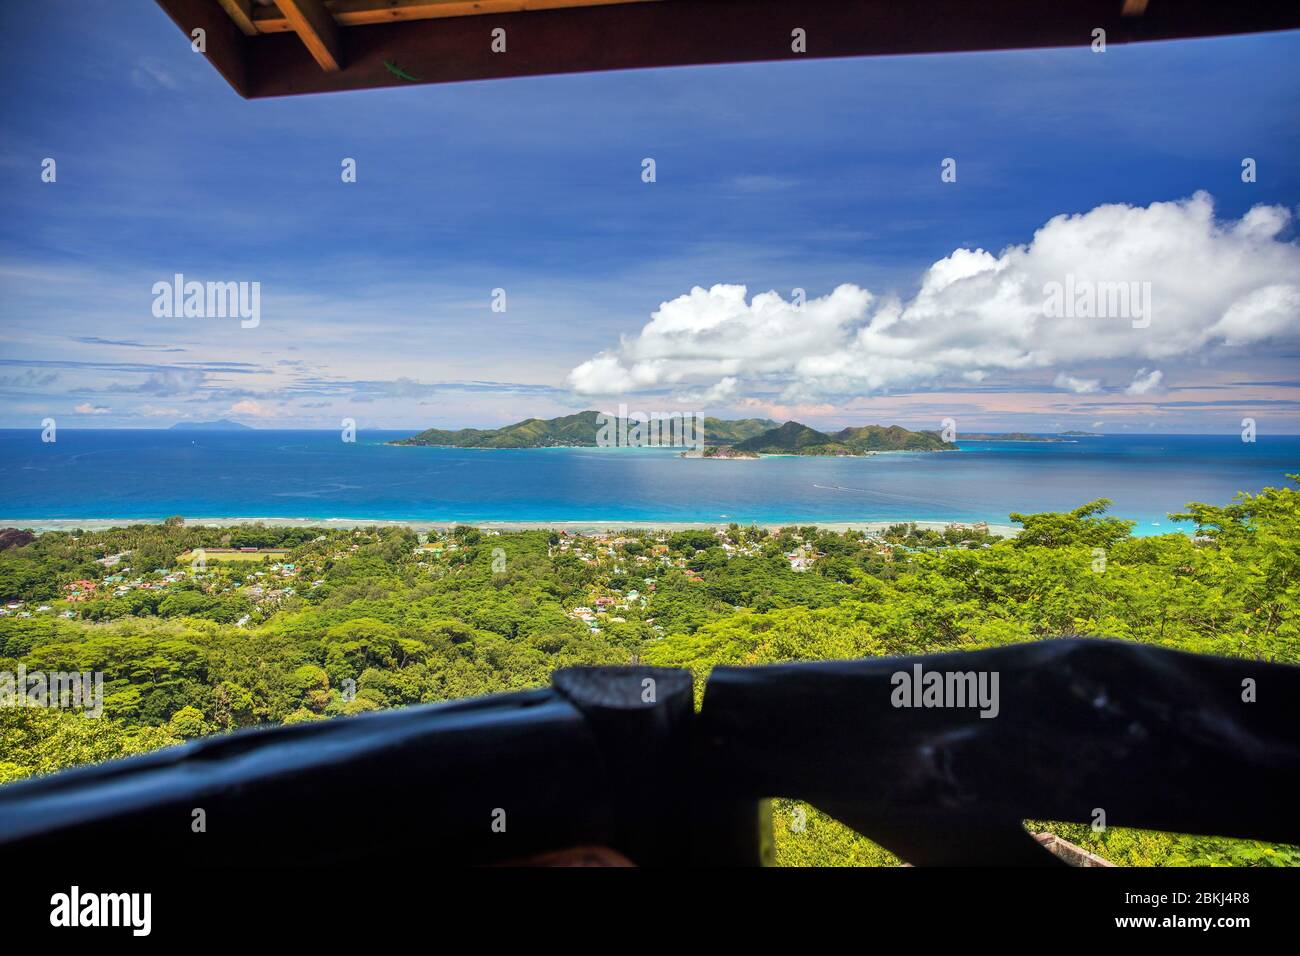 Seychelles, La Digue island, view on Praslin Island from the Nid d'Aigle at the sunset Stock Photo